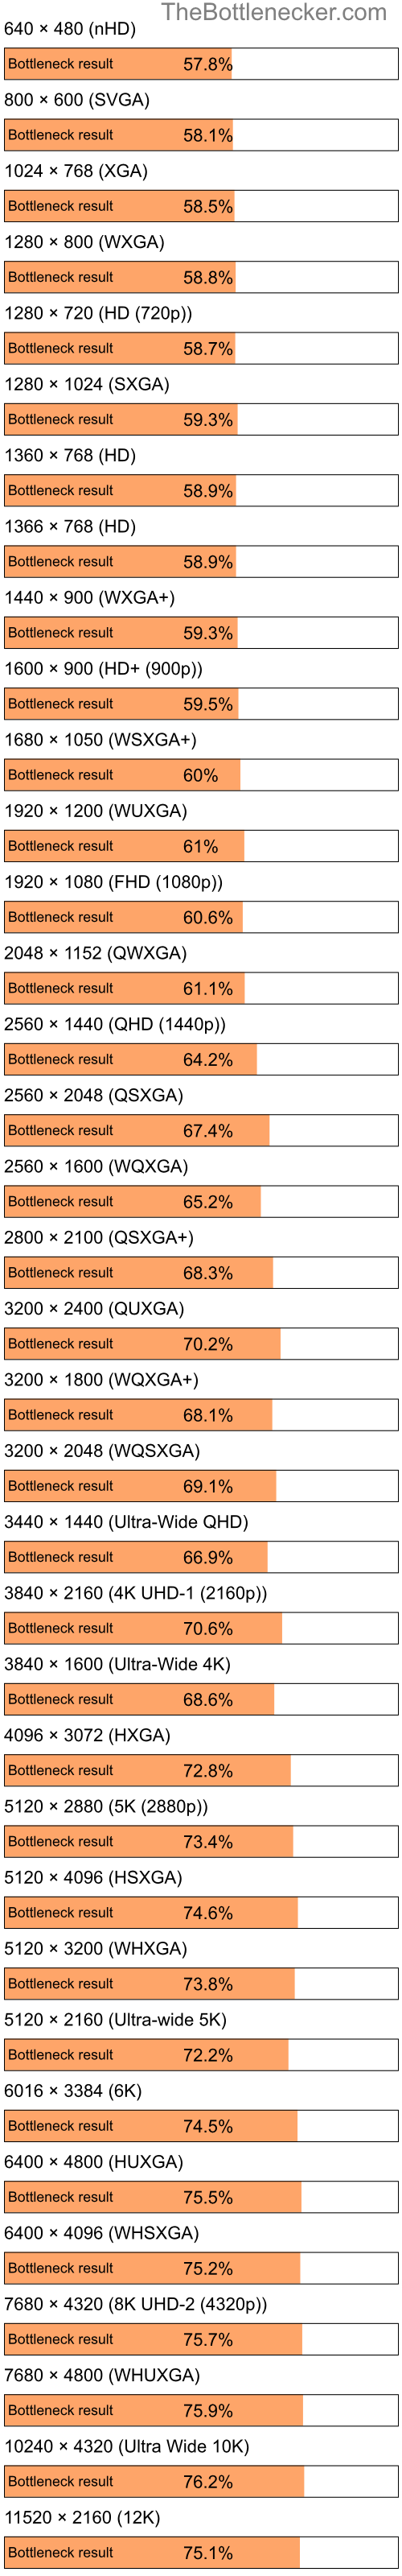 Bottleneck results by resolution for Intel Celeron M 410 and AMD M860G with Mobility Radeon 4100 in Processor Intense Tasks